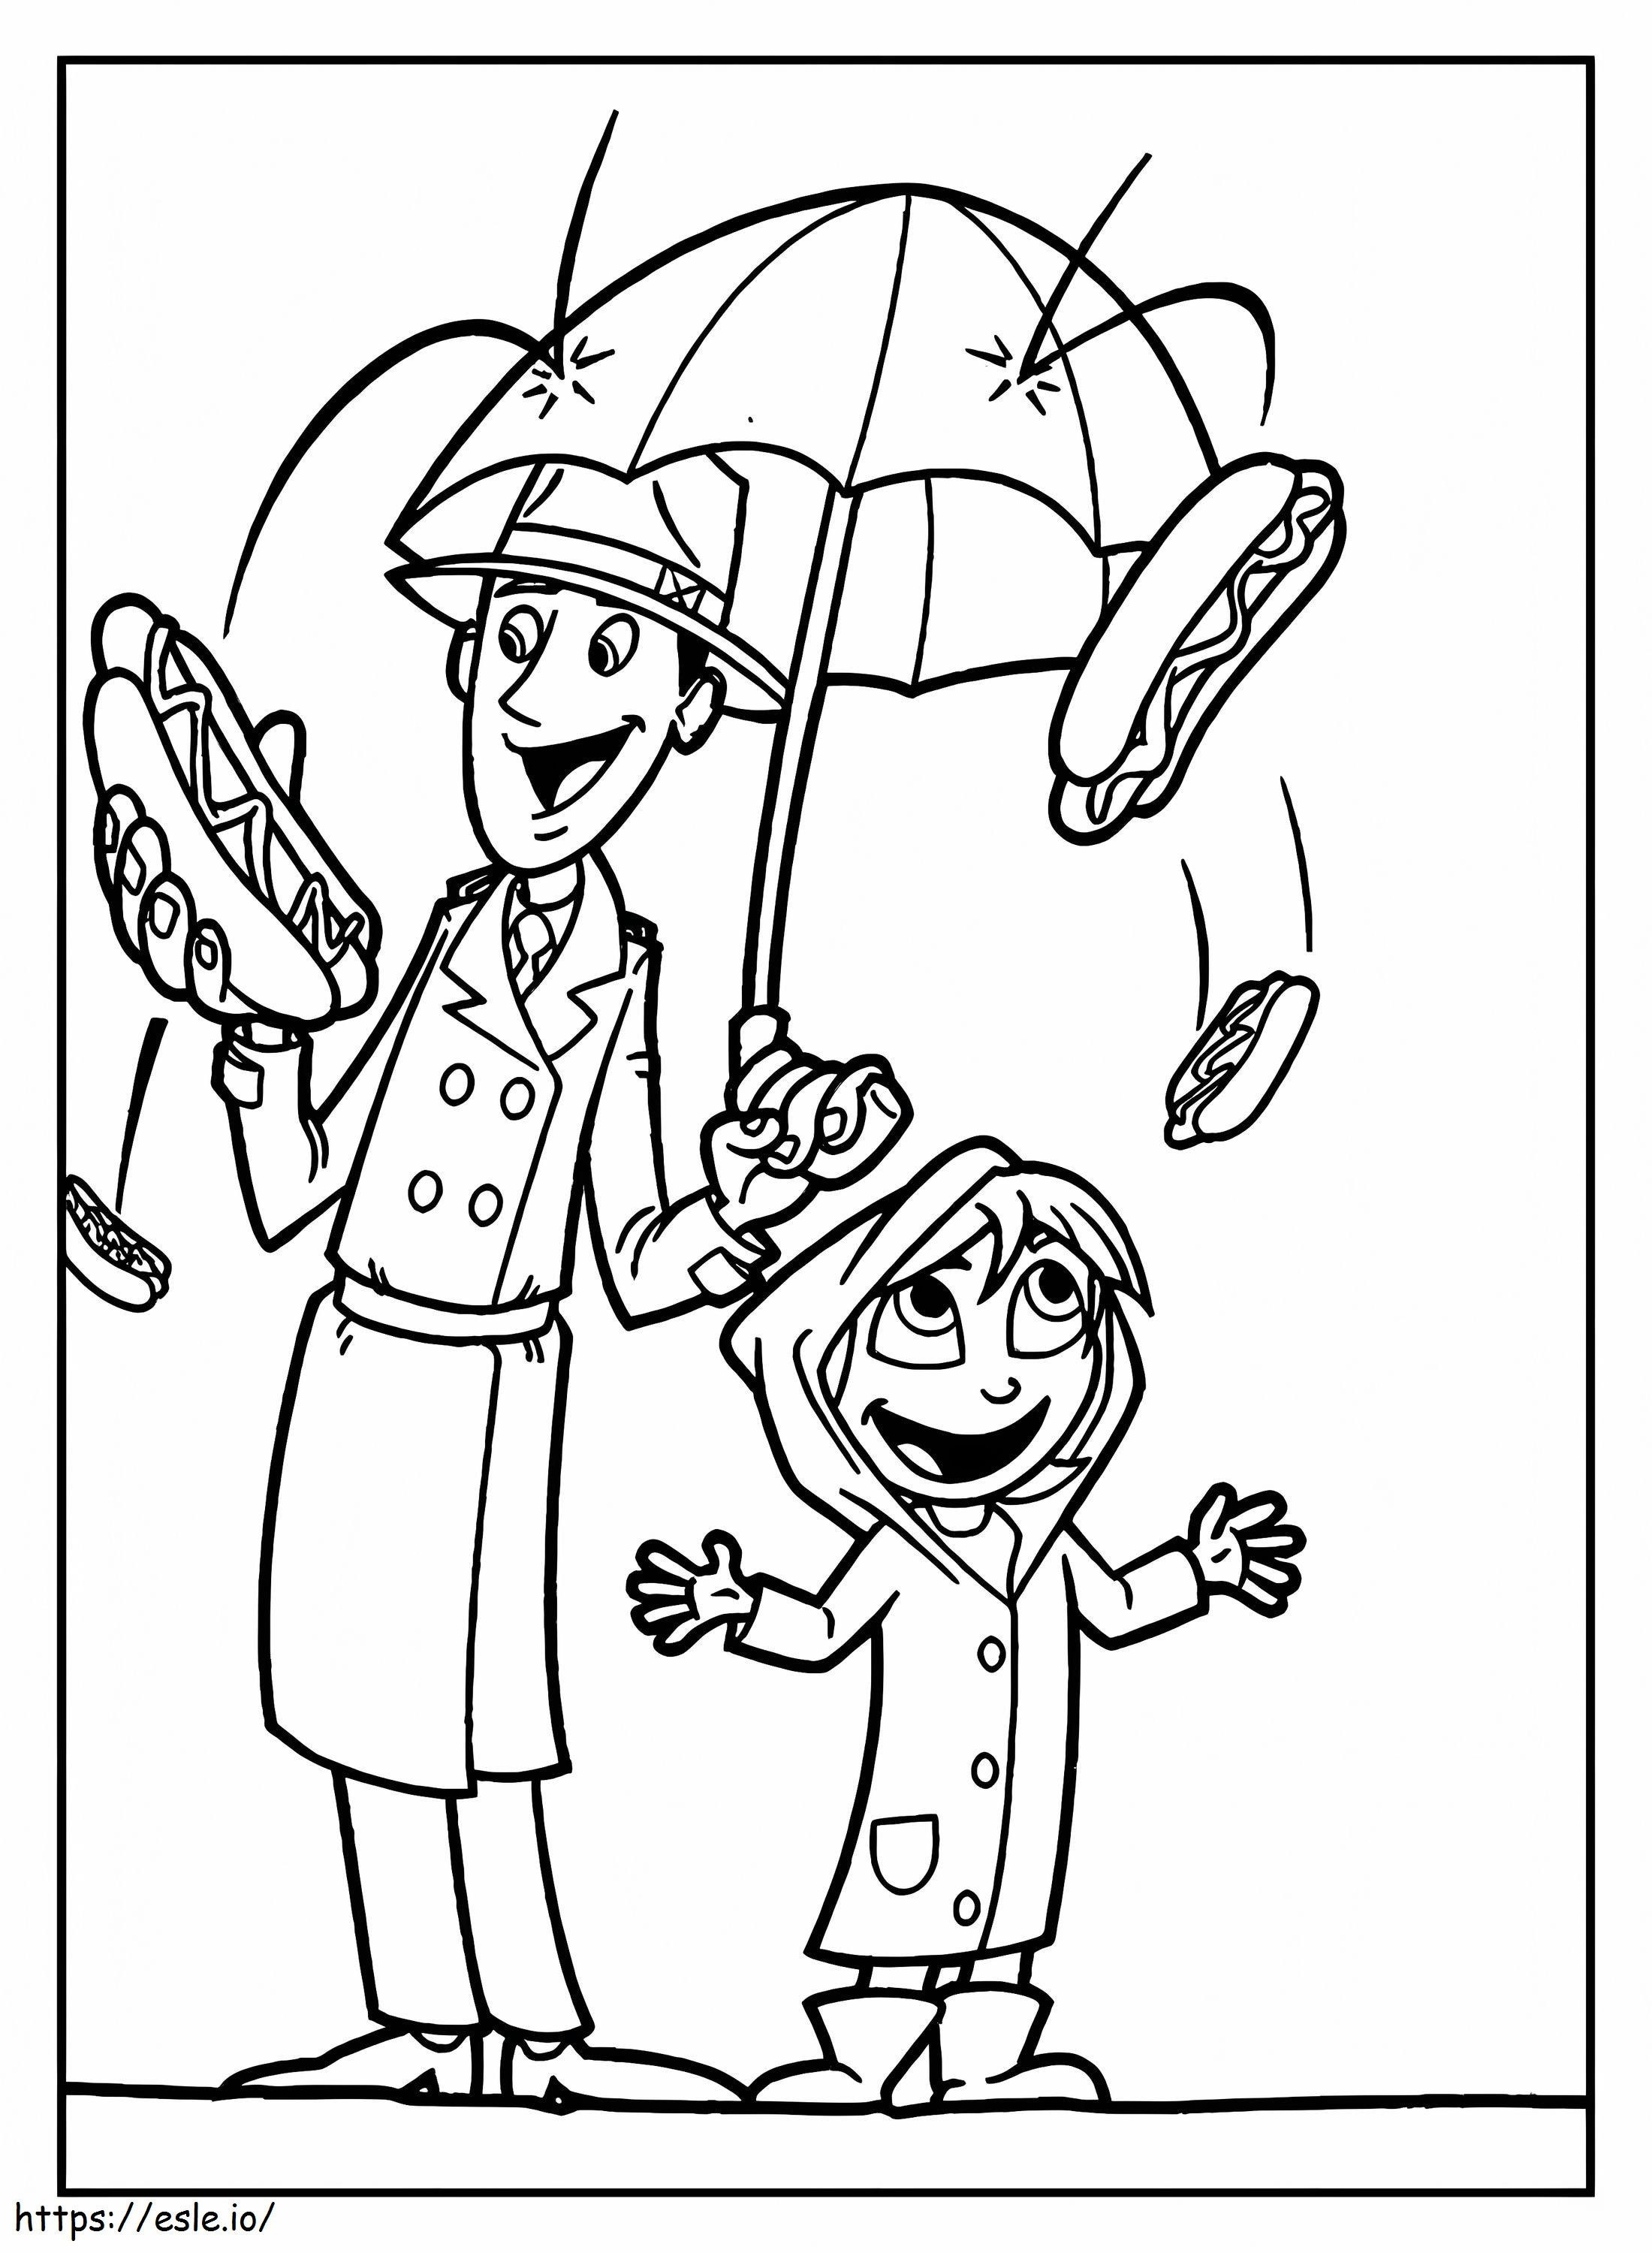 Cloudy With A Chance Of Meatballs 6 coloring page